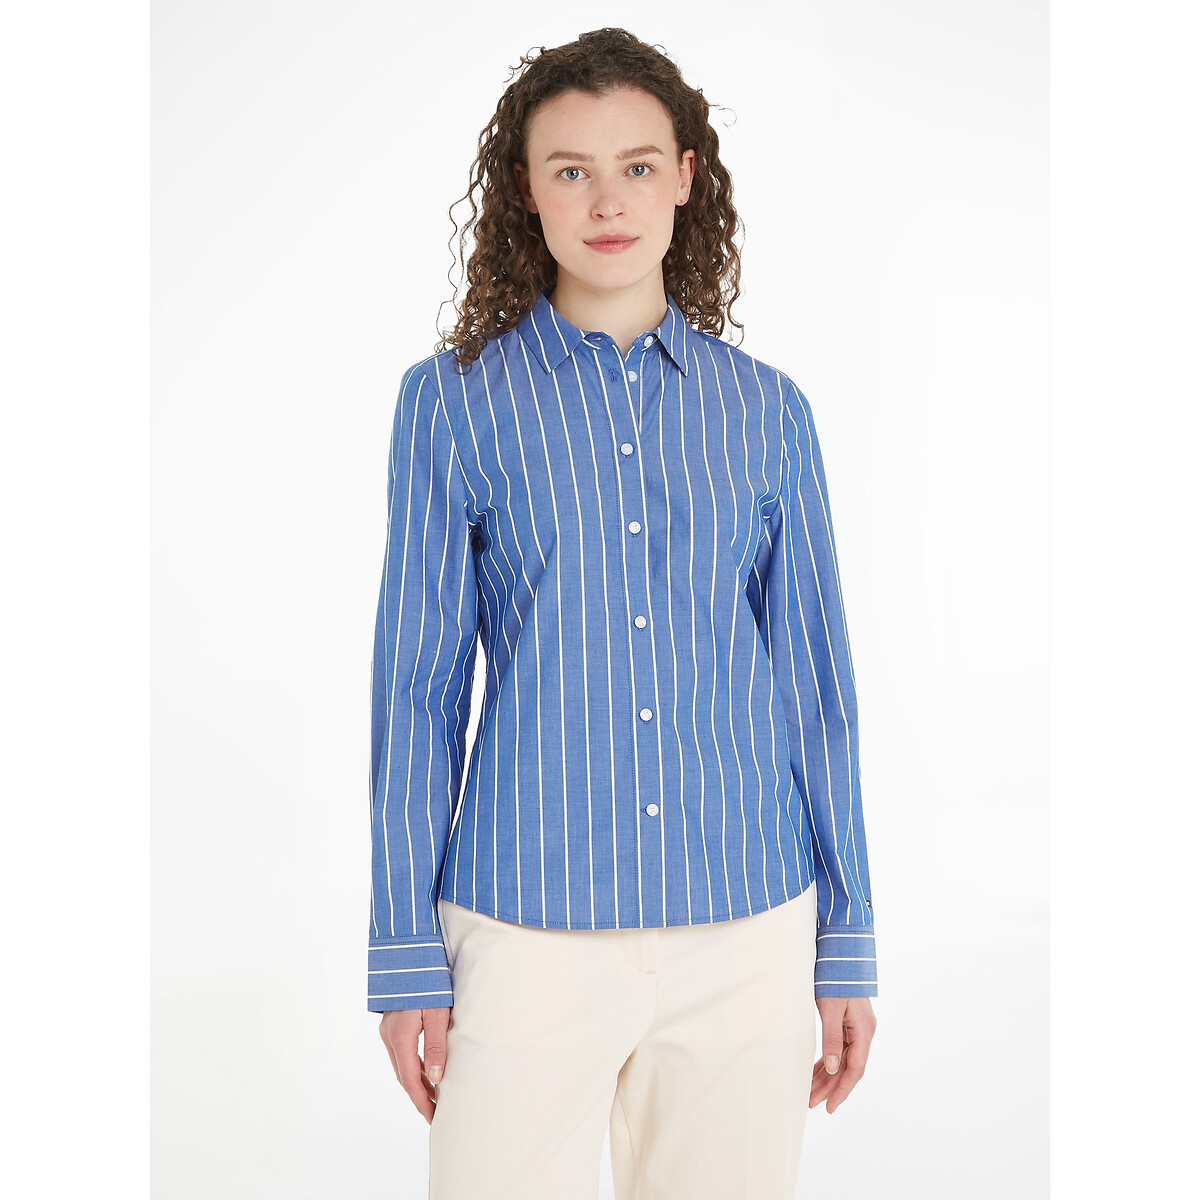 Striped Cotton Shirt in a Regular Fit